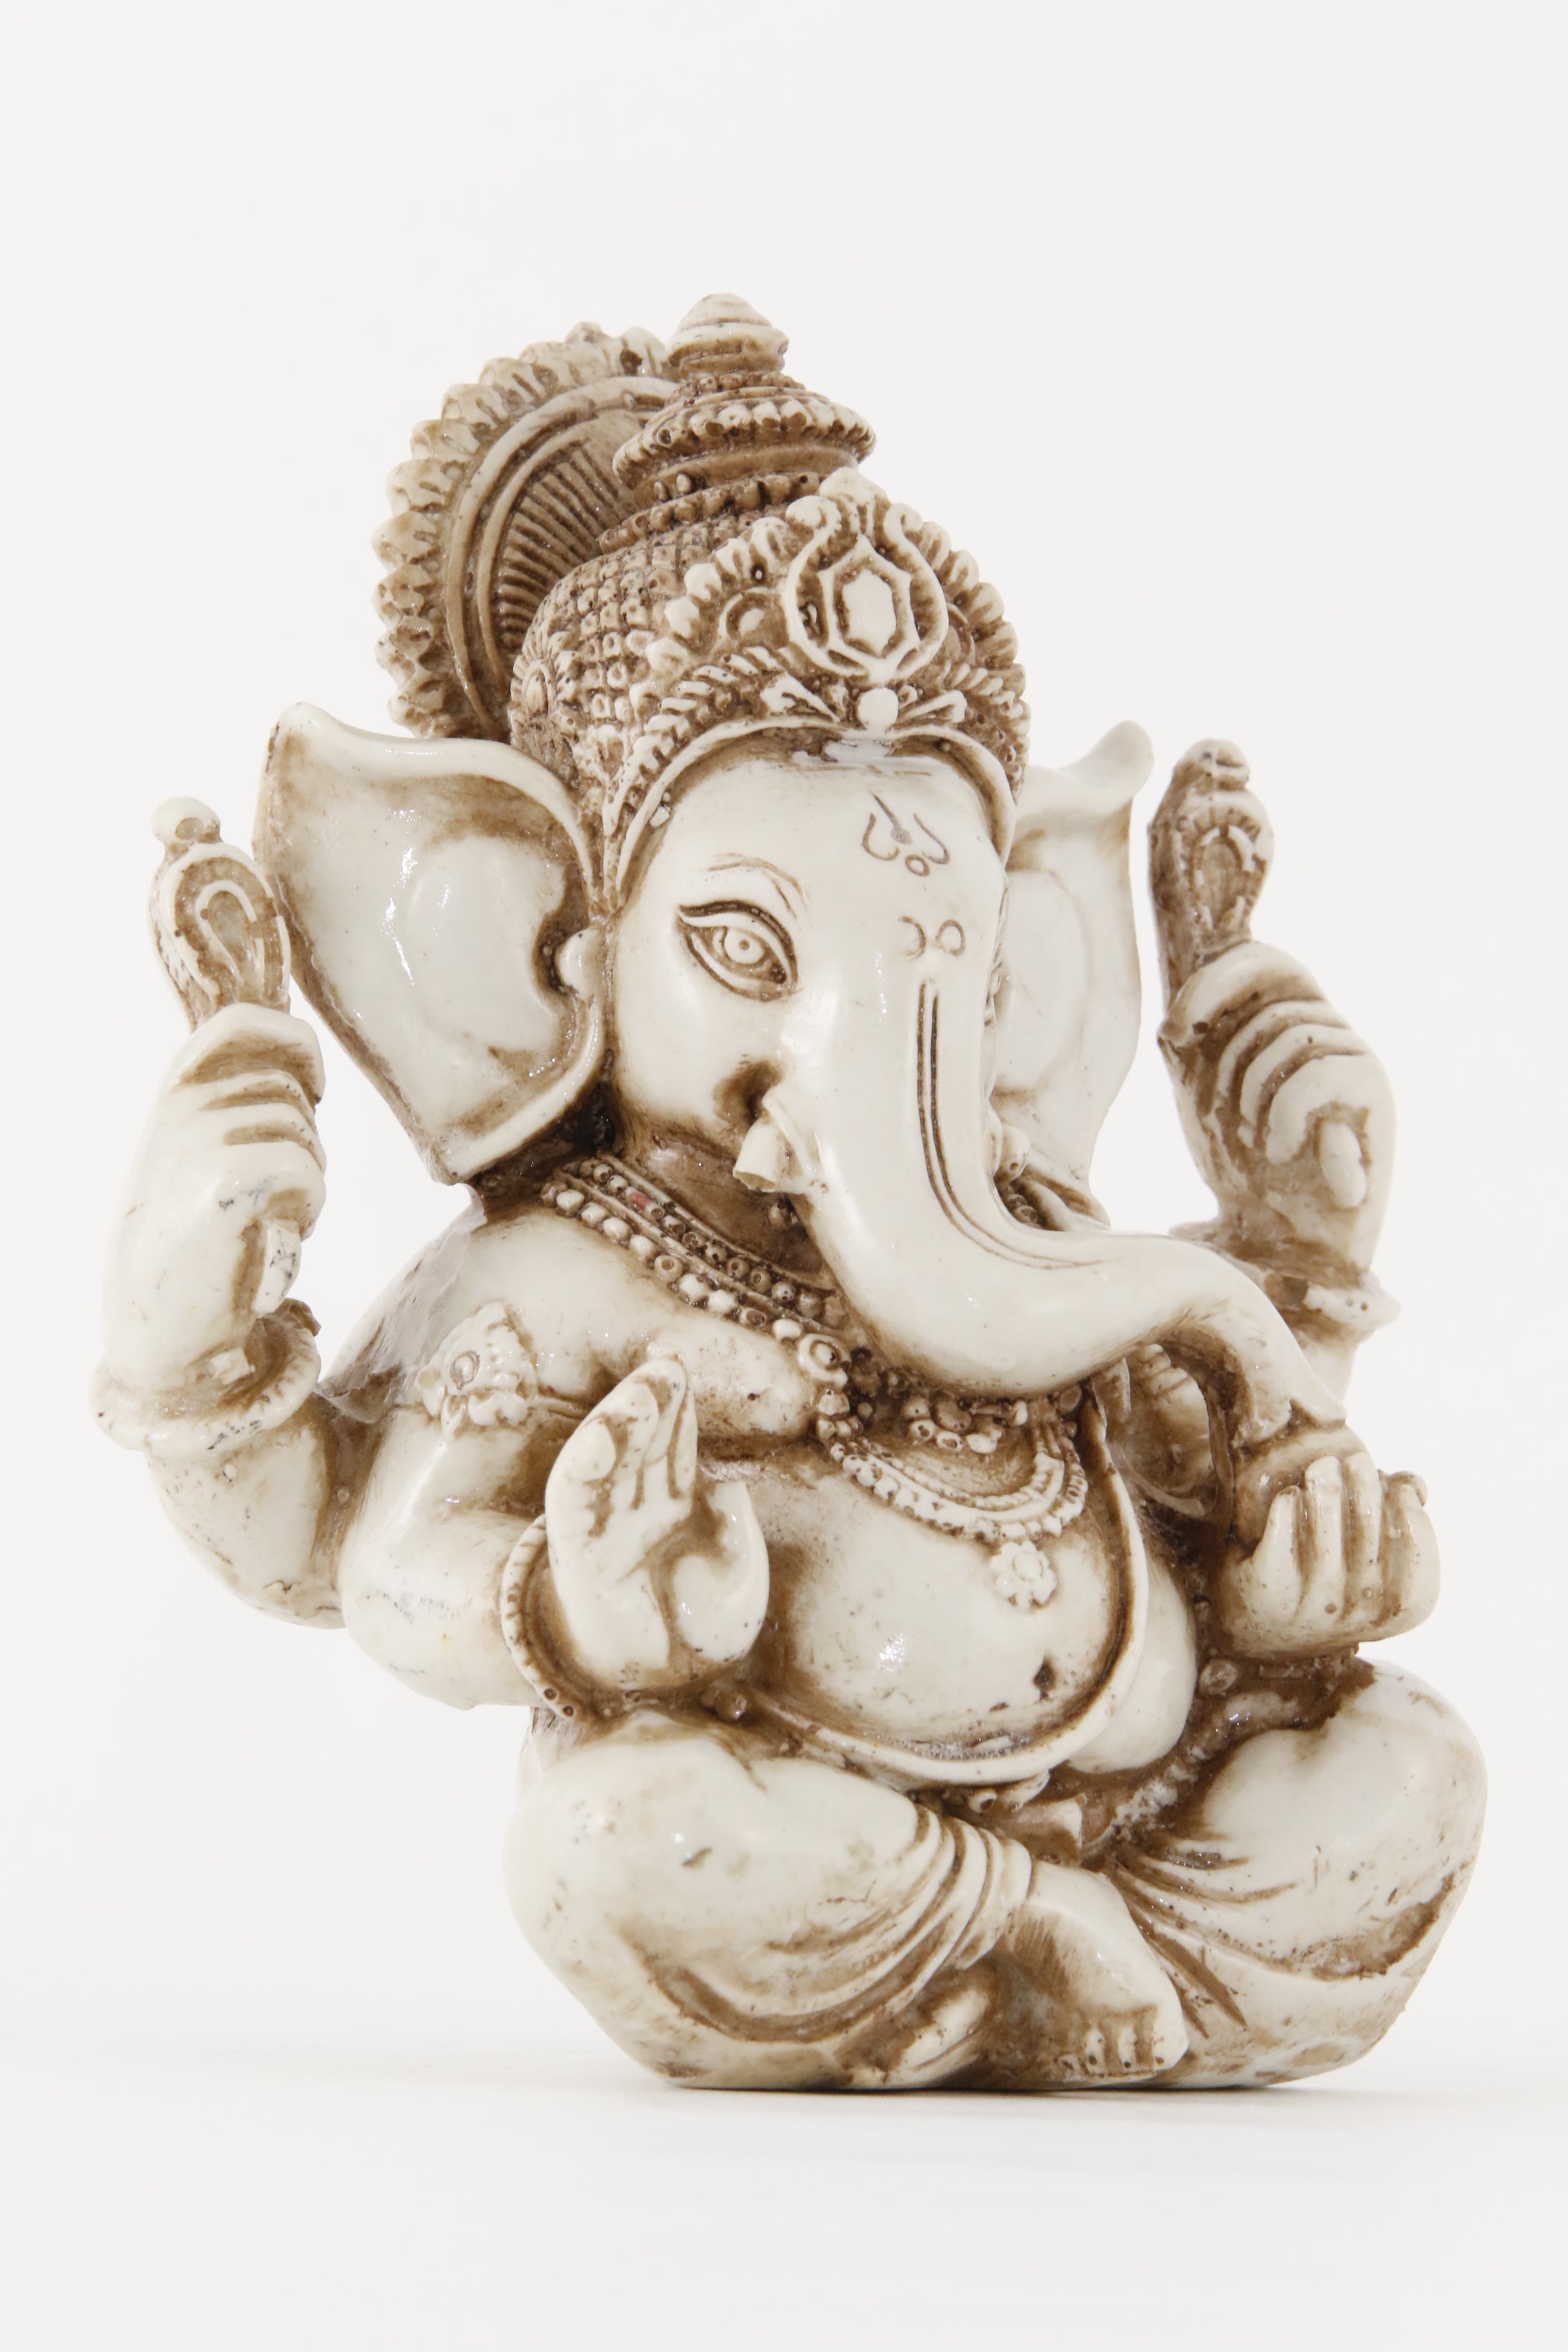 Lord Ganesha Side View Stock Photo 719777506 | Shutterstock